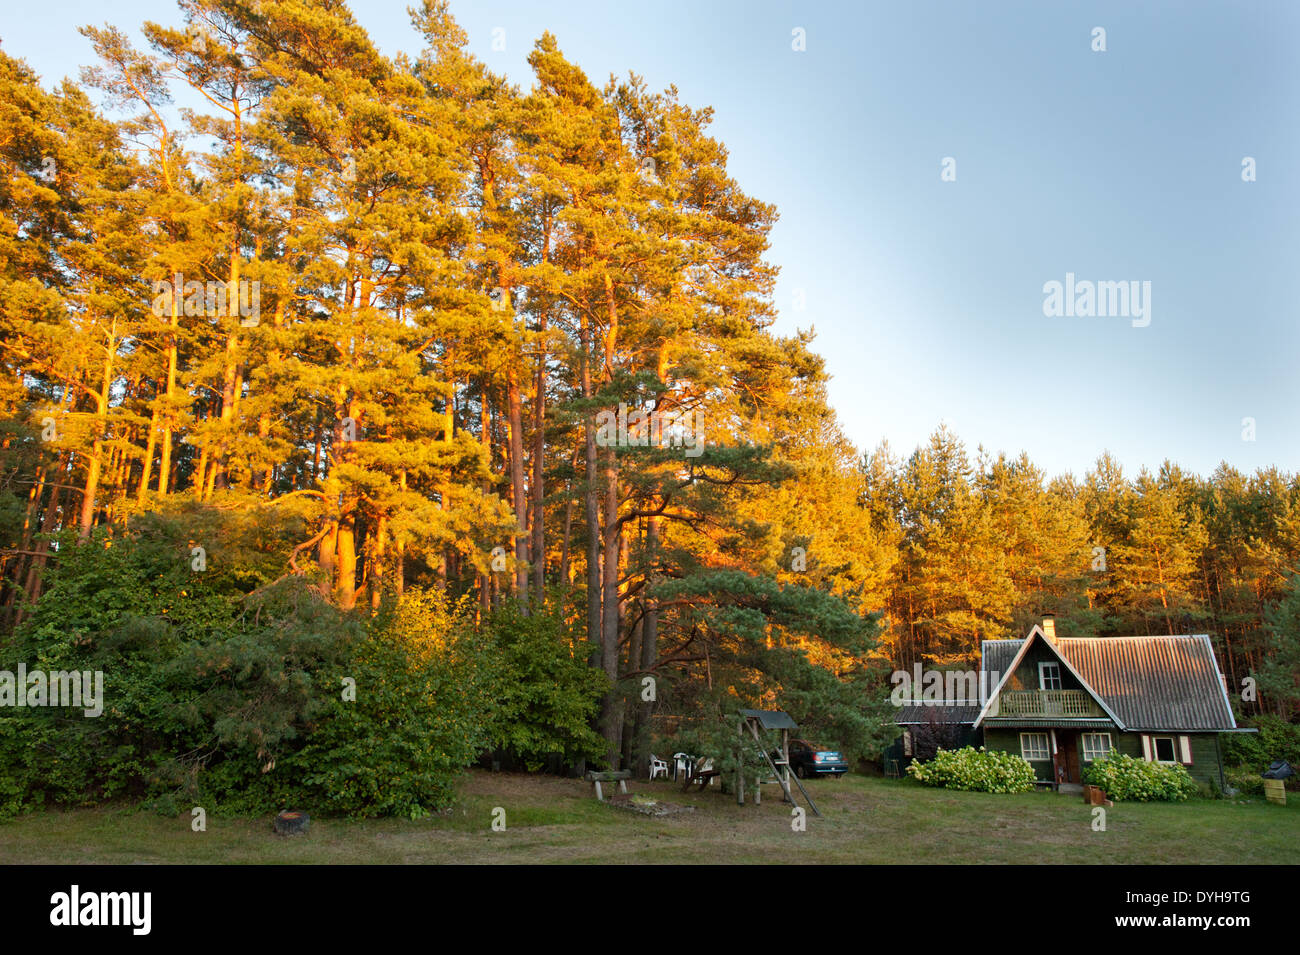 A Sodyba or typical wooden, countryside summer house in rural Lithuania. Found across Eastern Europe with land for growing food and relaxing in nature Stock Photo